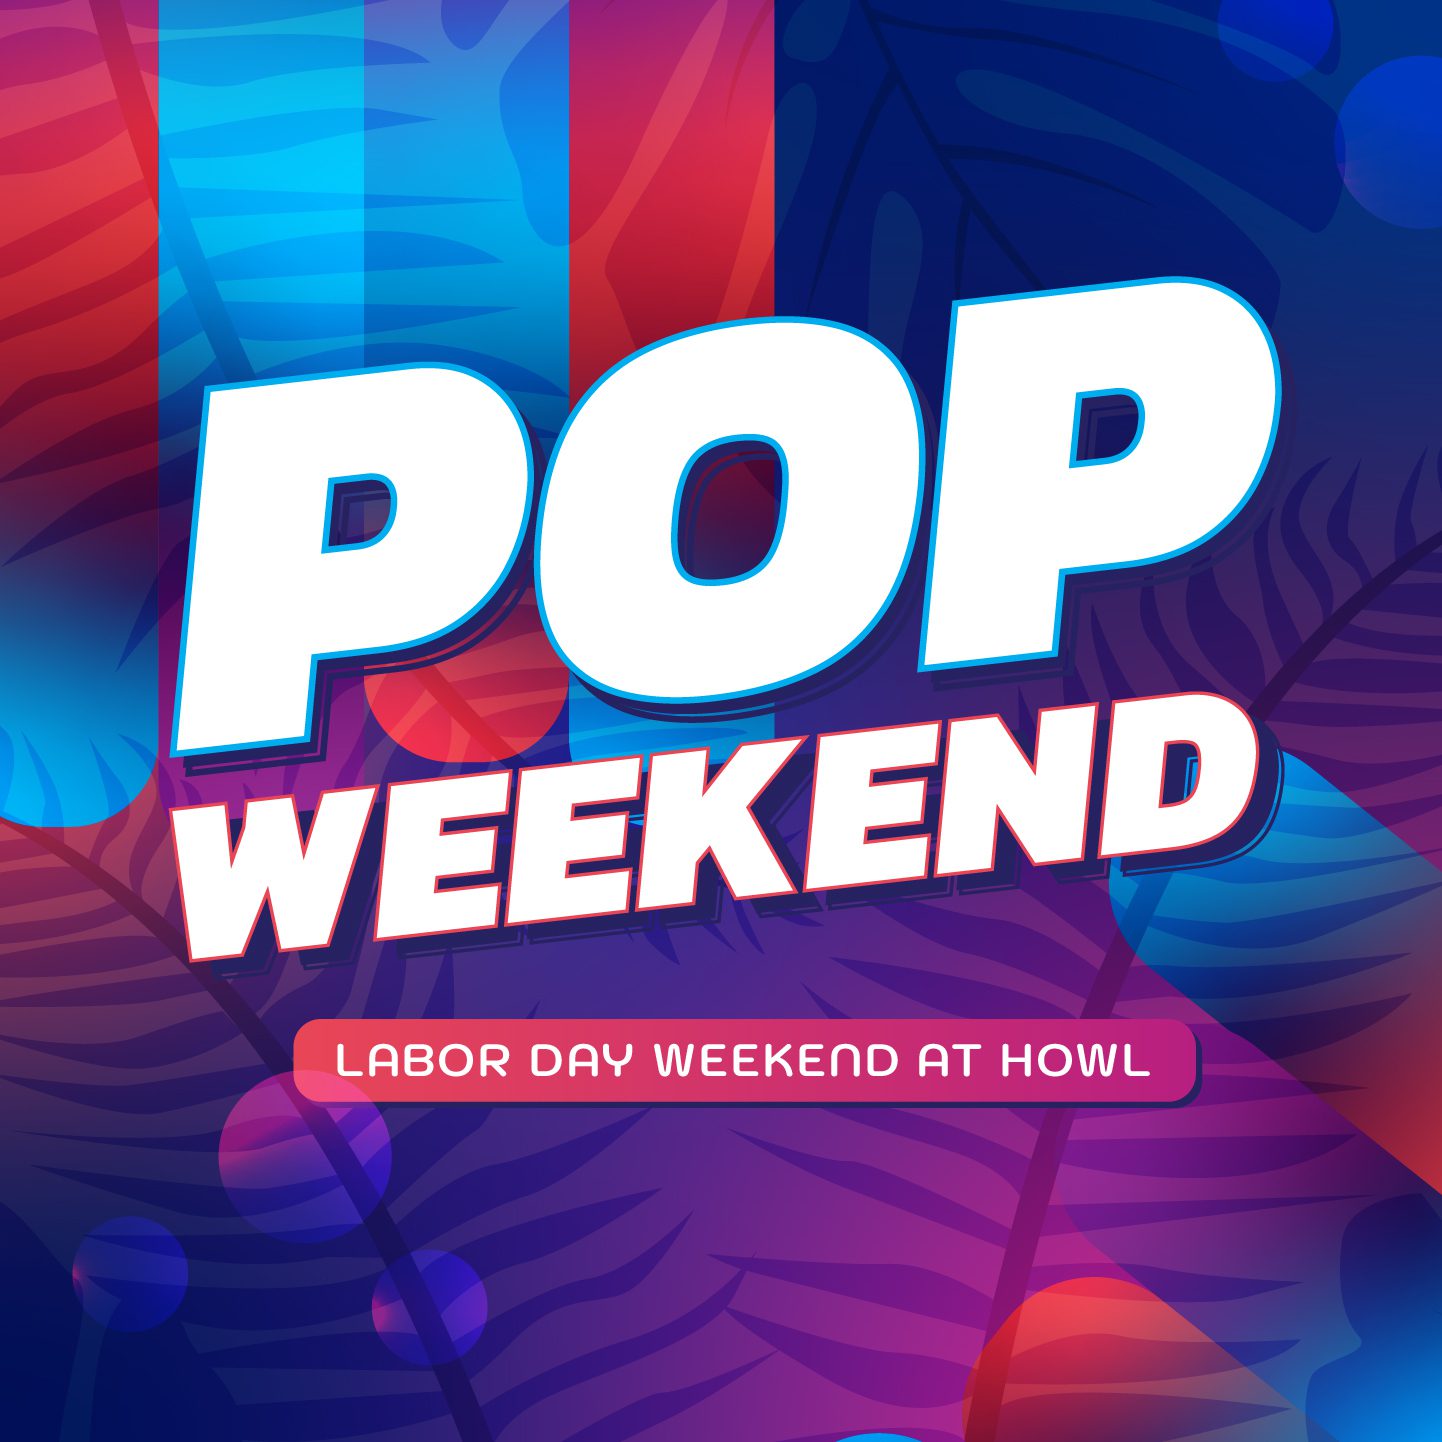  Labor Day Weekend Parties and Events